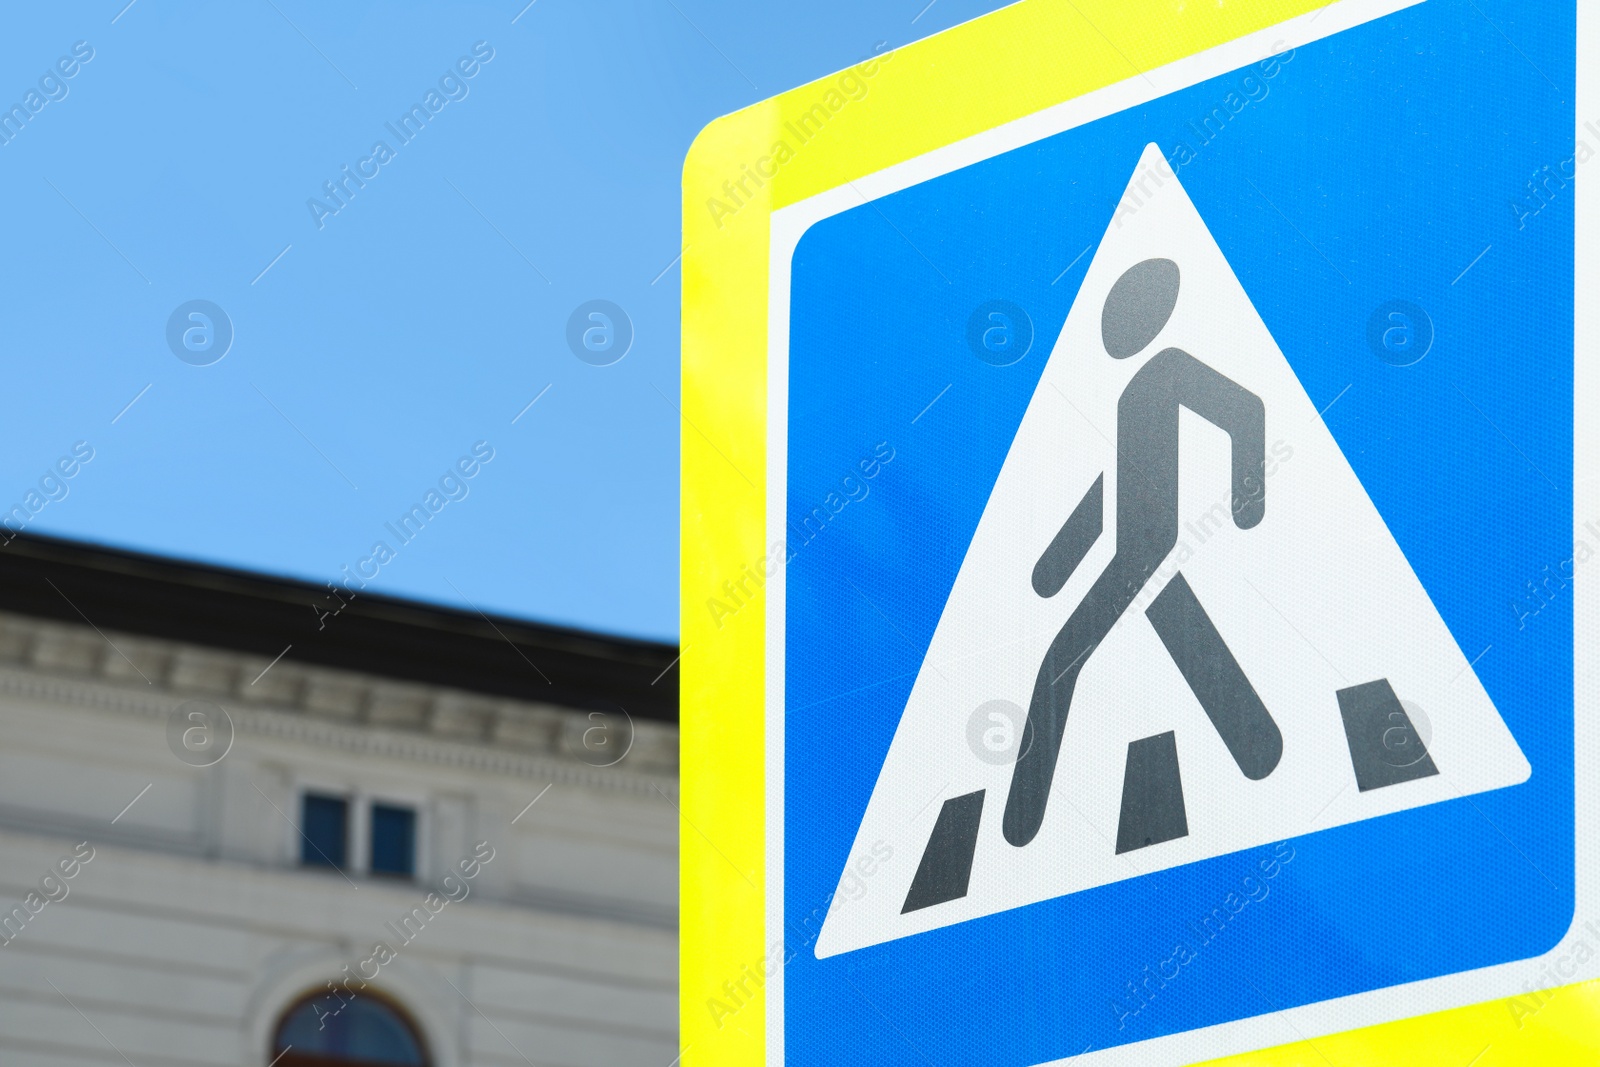 Photo of Pedestrian Crossing traffic sign in city on sunny day, closeup